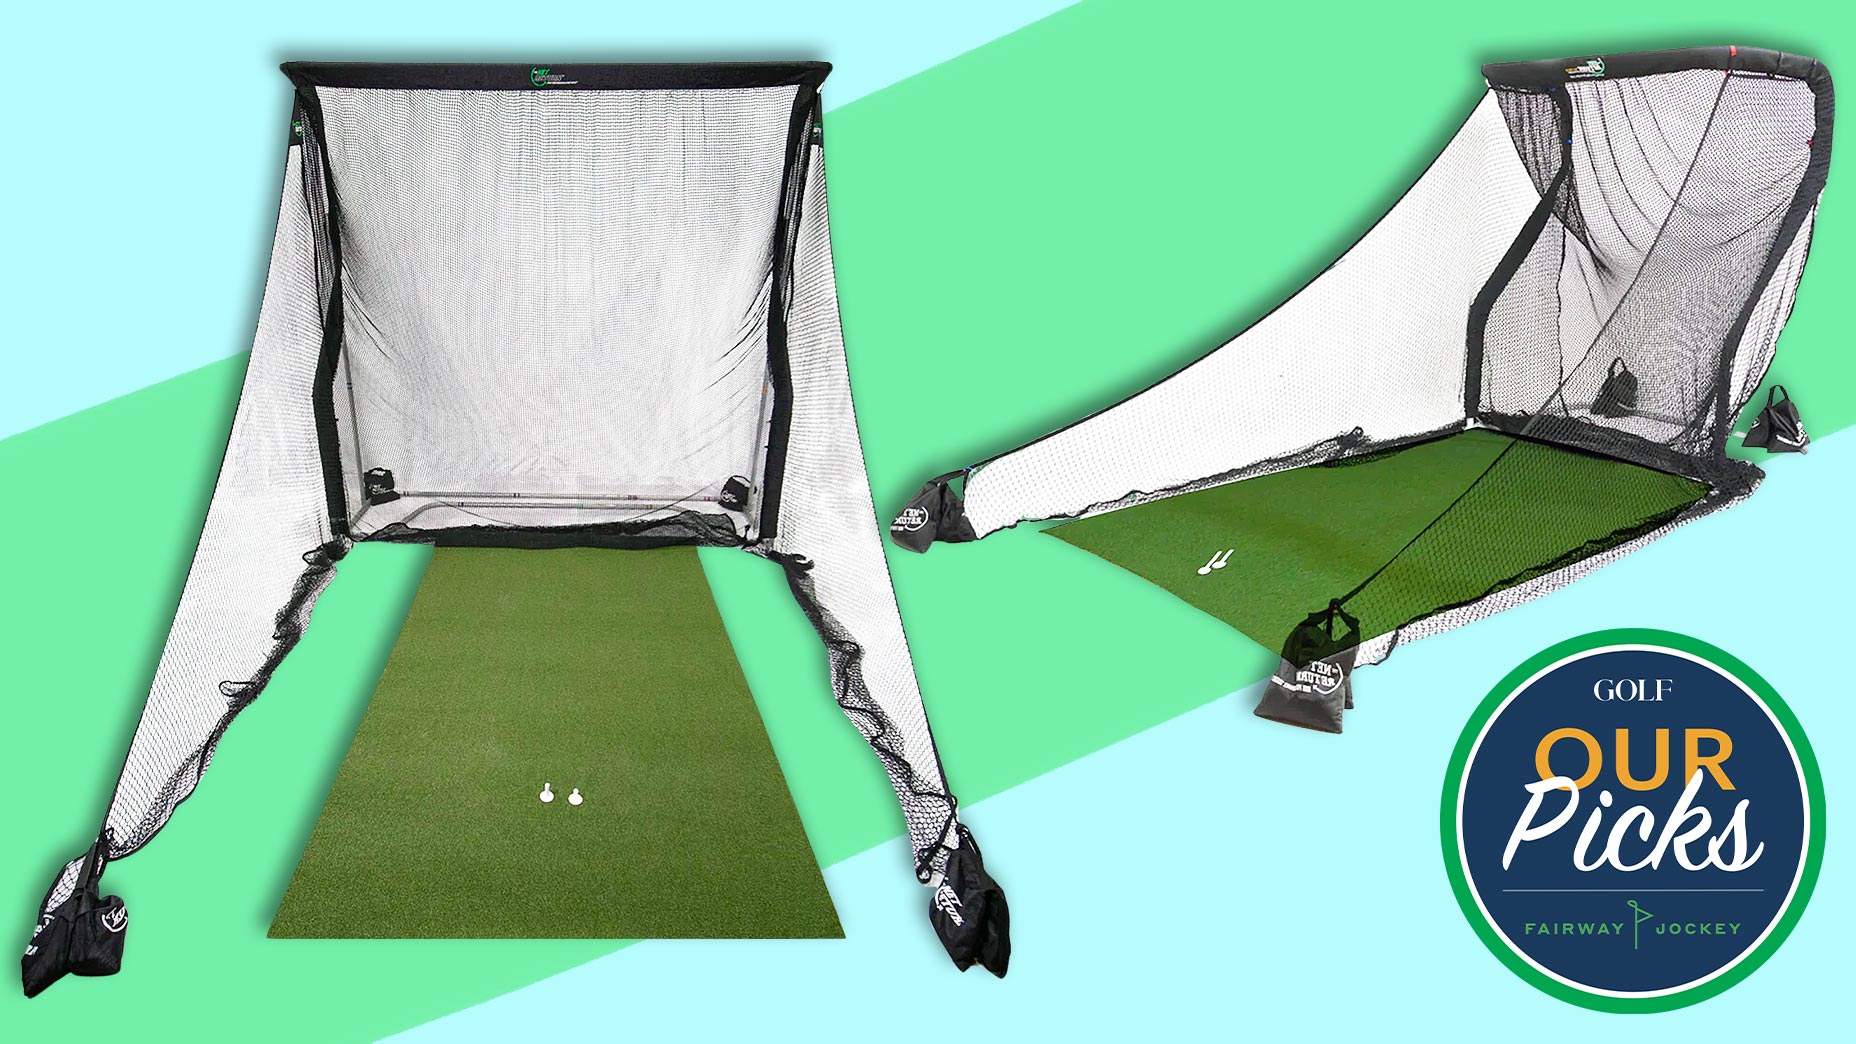 This mini net is perfect for your at-home golf practice area